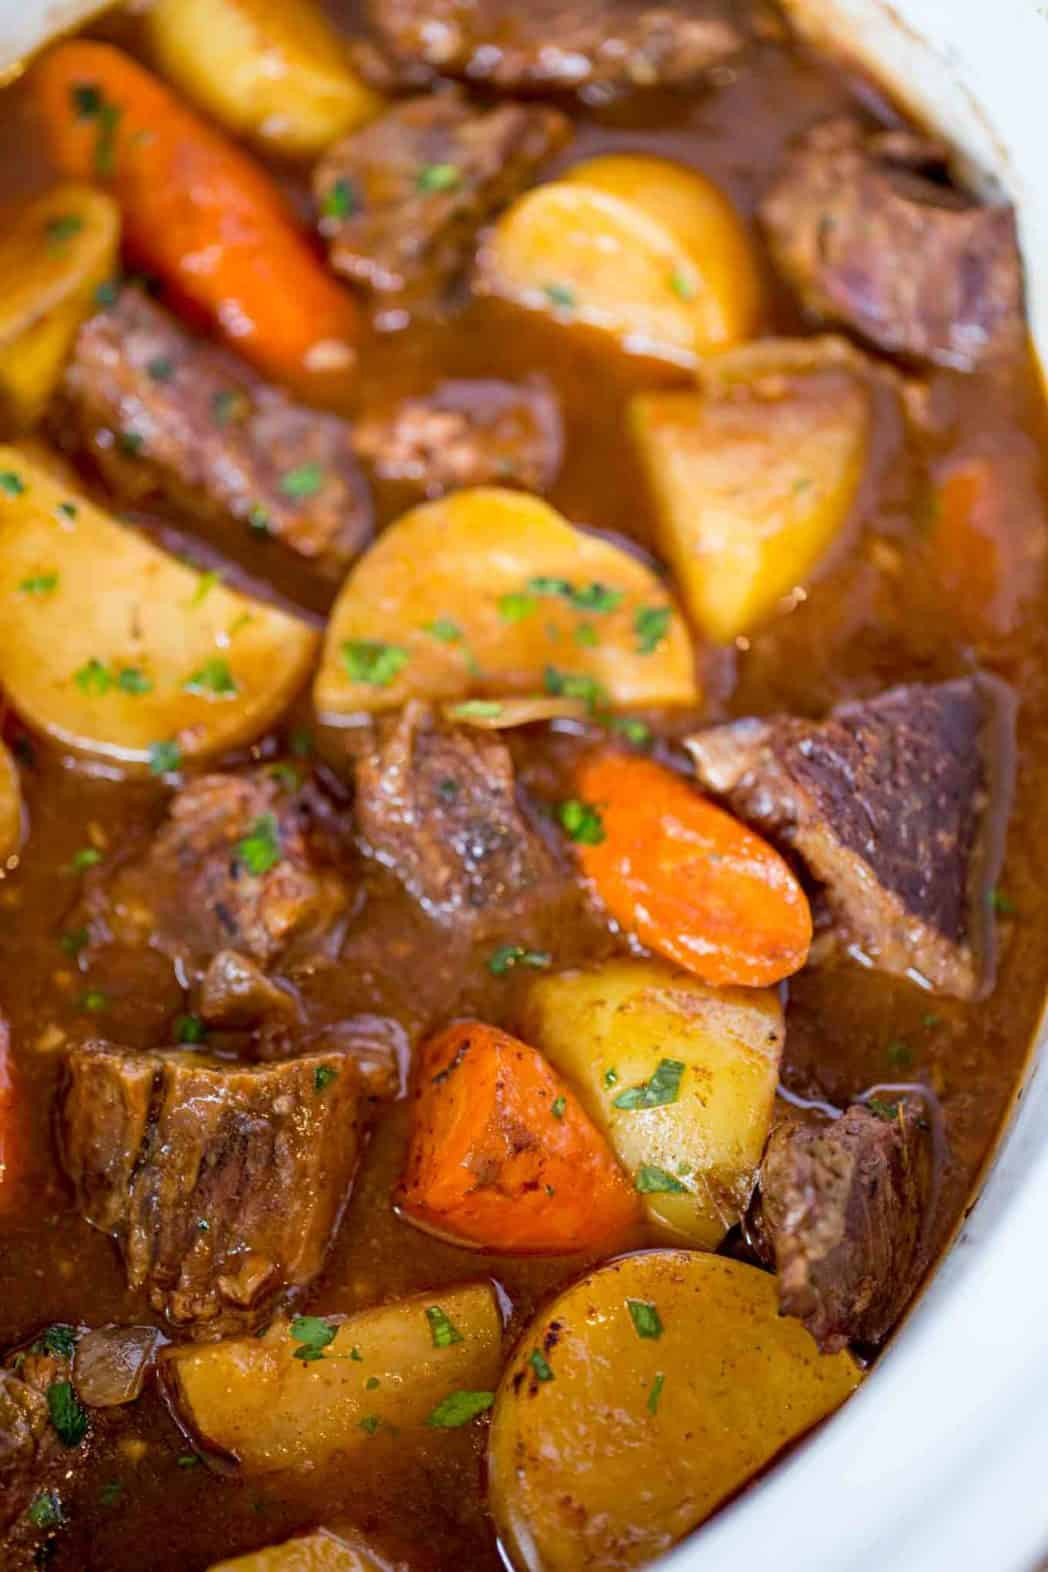 Recipes For Beef Stew Meat
 Ultimate Slow Cooker Beef Stew Dinner then Dessert